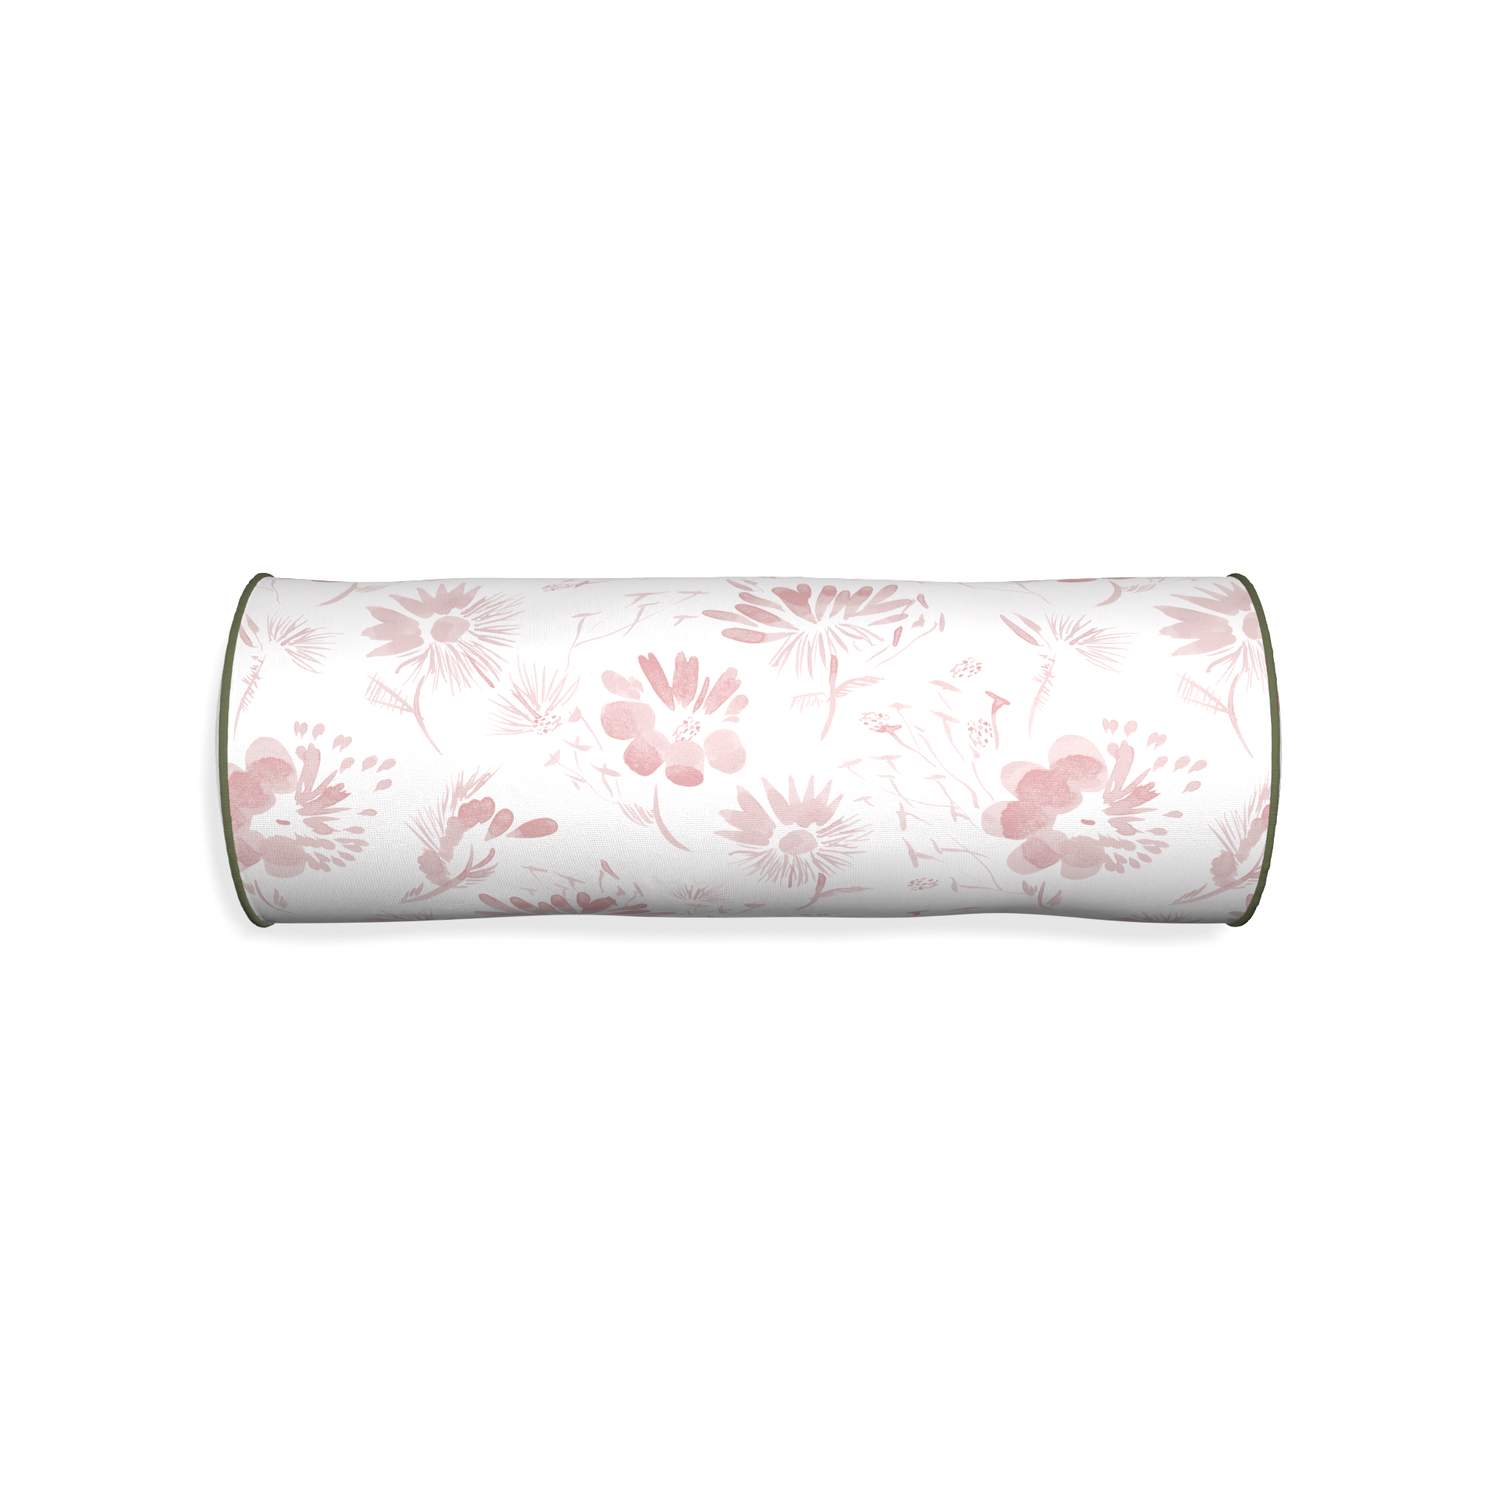 Bolster blake custom pink floralpillow with f piping on white background